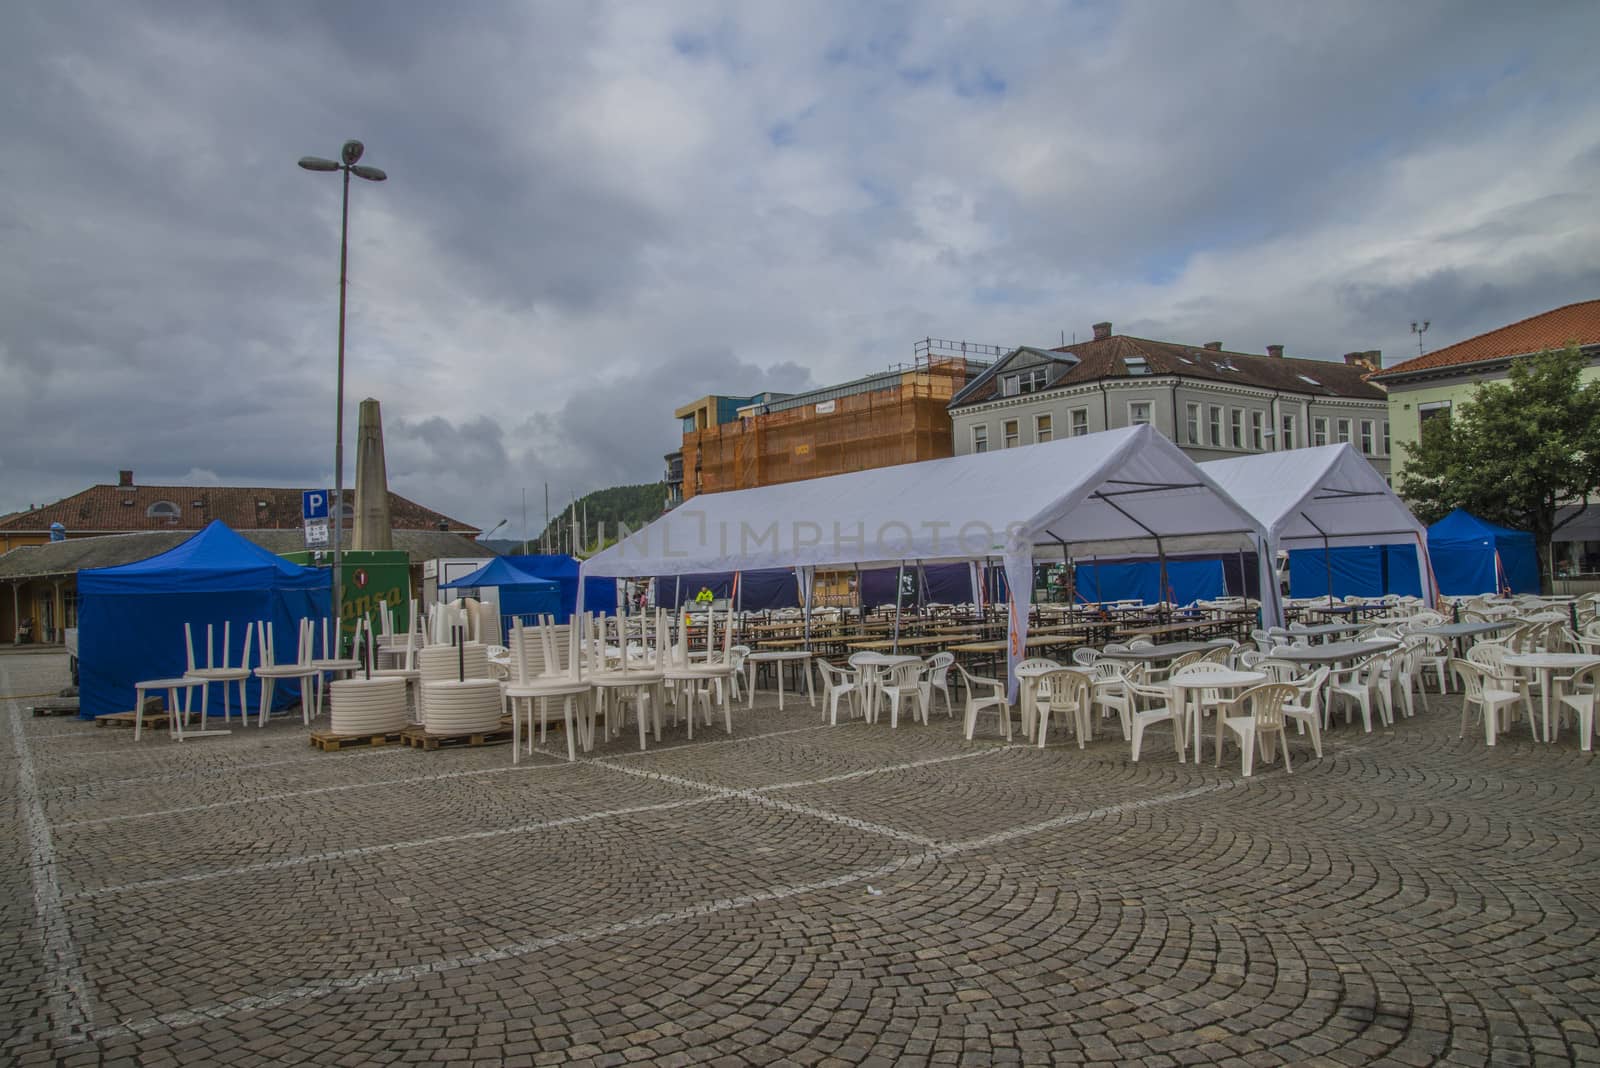 Here made ������it clear to Halden food and harbor festival which is held every year on the last weekend of June